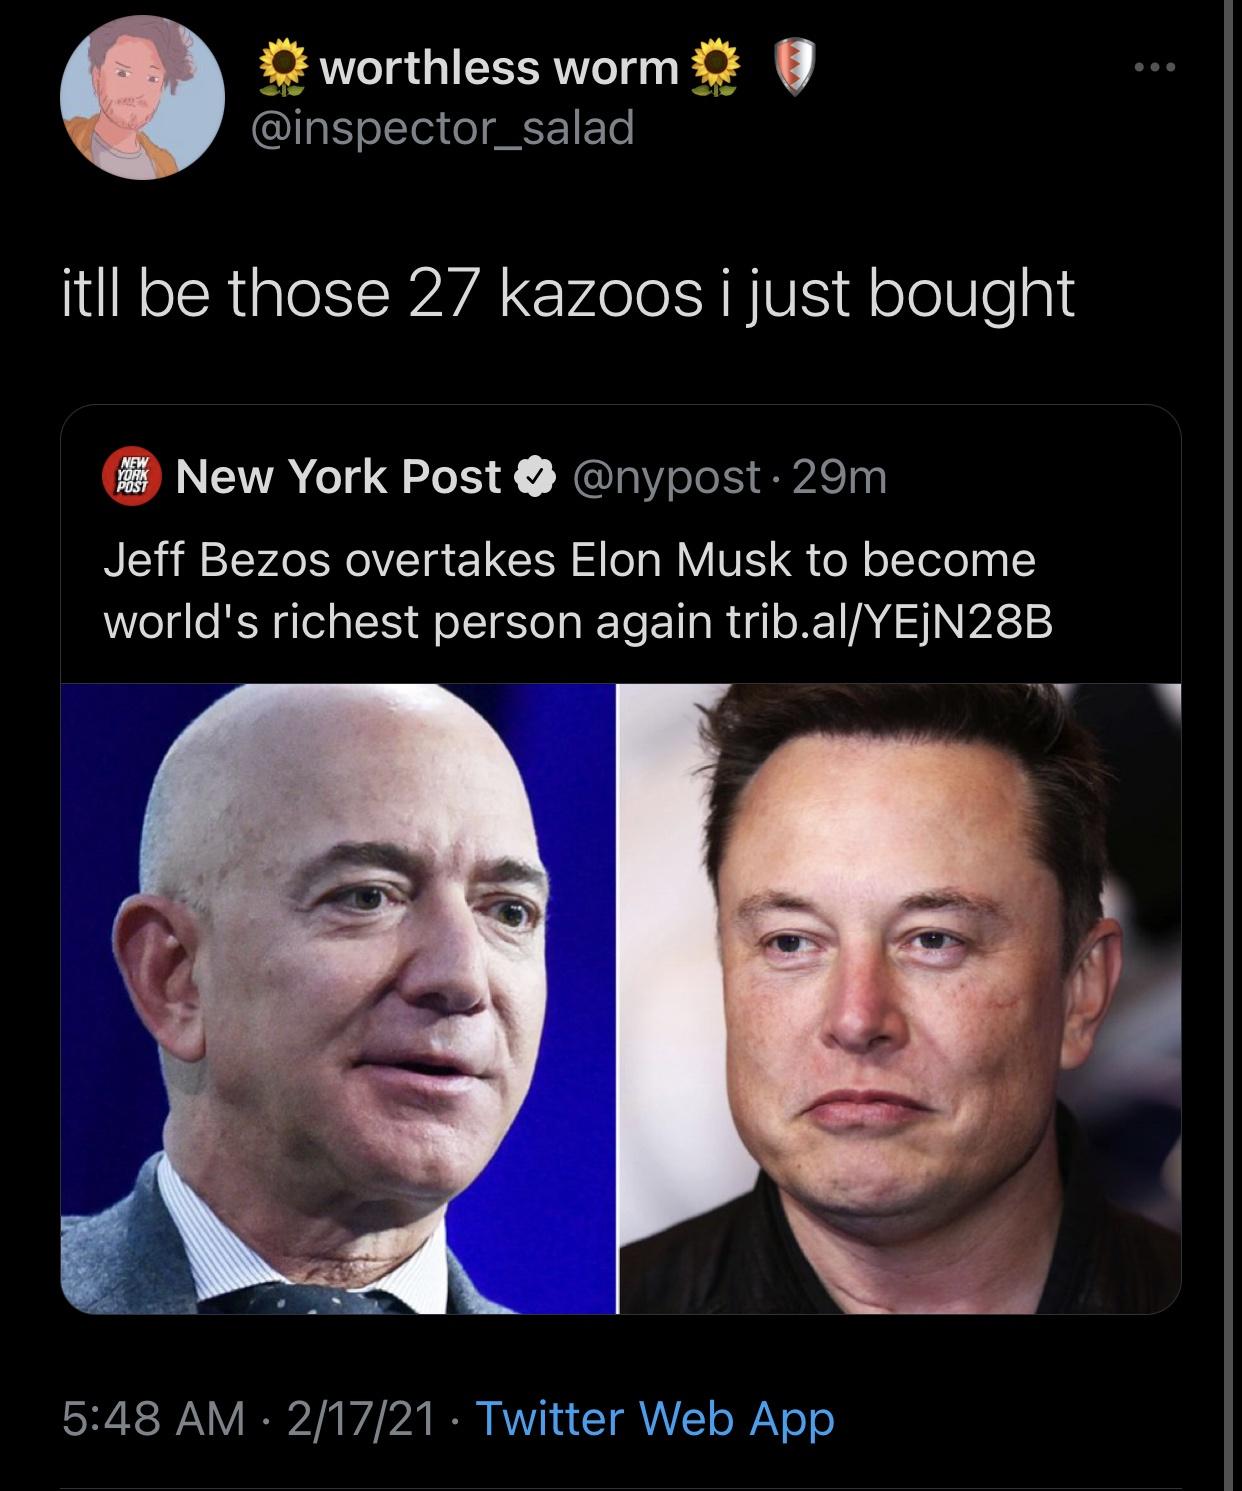 head - O worthless worm itll be those 27 kazoos i just bought New York Post New York Post . 29m Jeff Bezos overtakes Elon Musk to become world's richest person again trib.alYEJN28B 21721 Twitter Web App